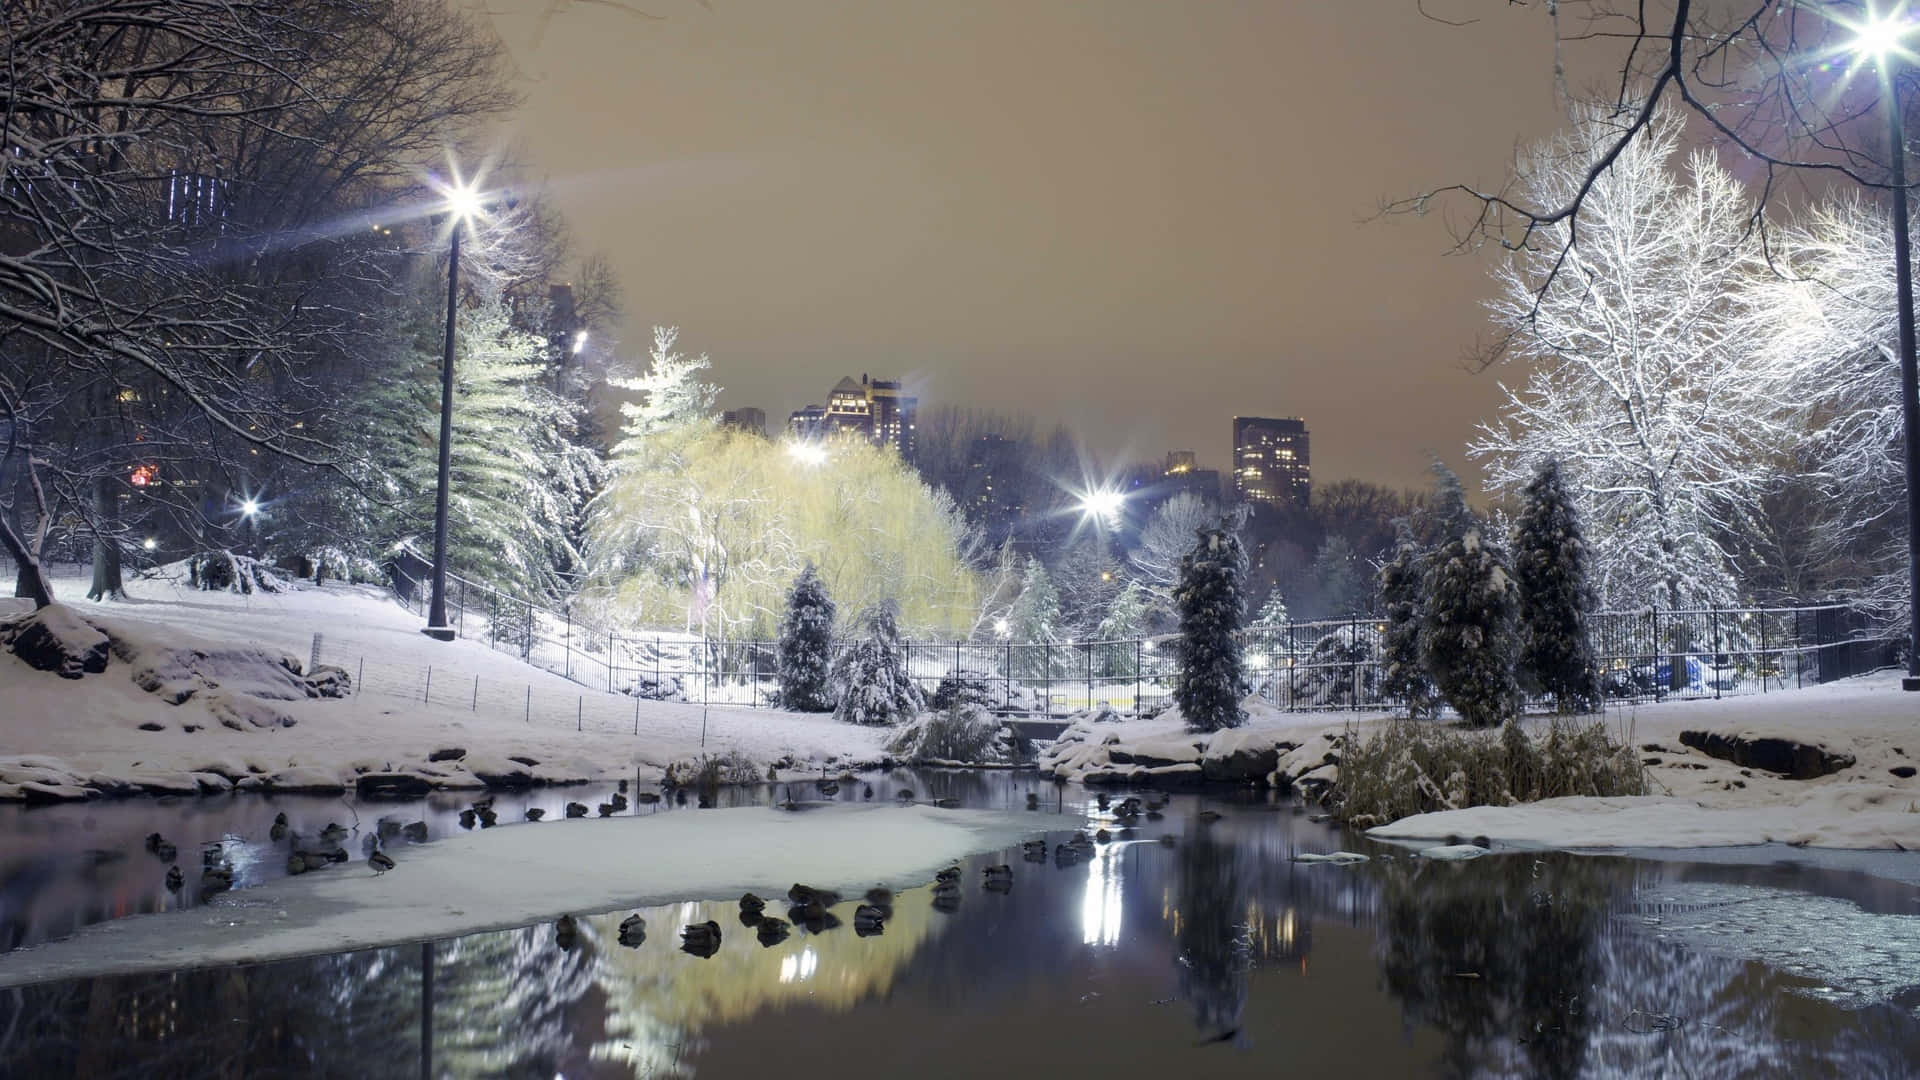 A Snowy Park With Lights And A Pond